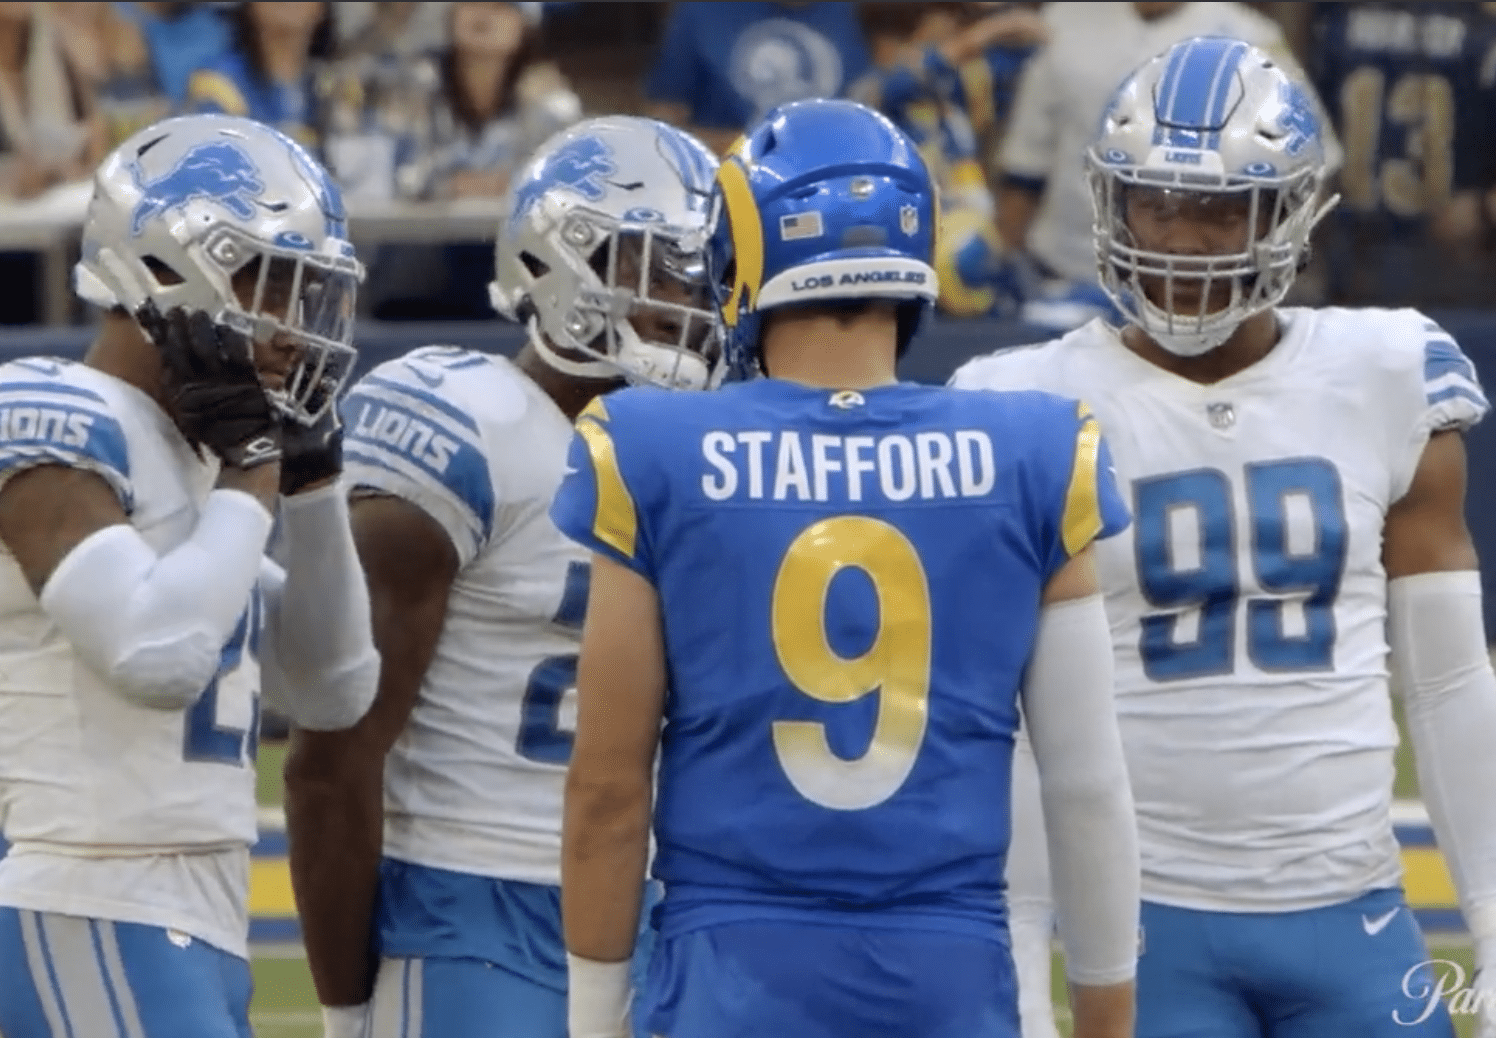 Matthew Stafford Los Angeles Rams Detroit Lions nearing Playoff collision with Matthew Stafford